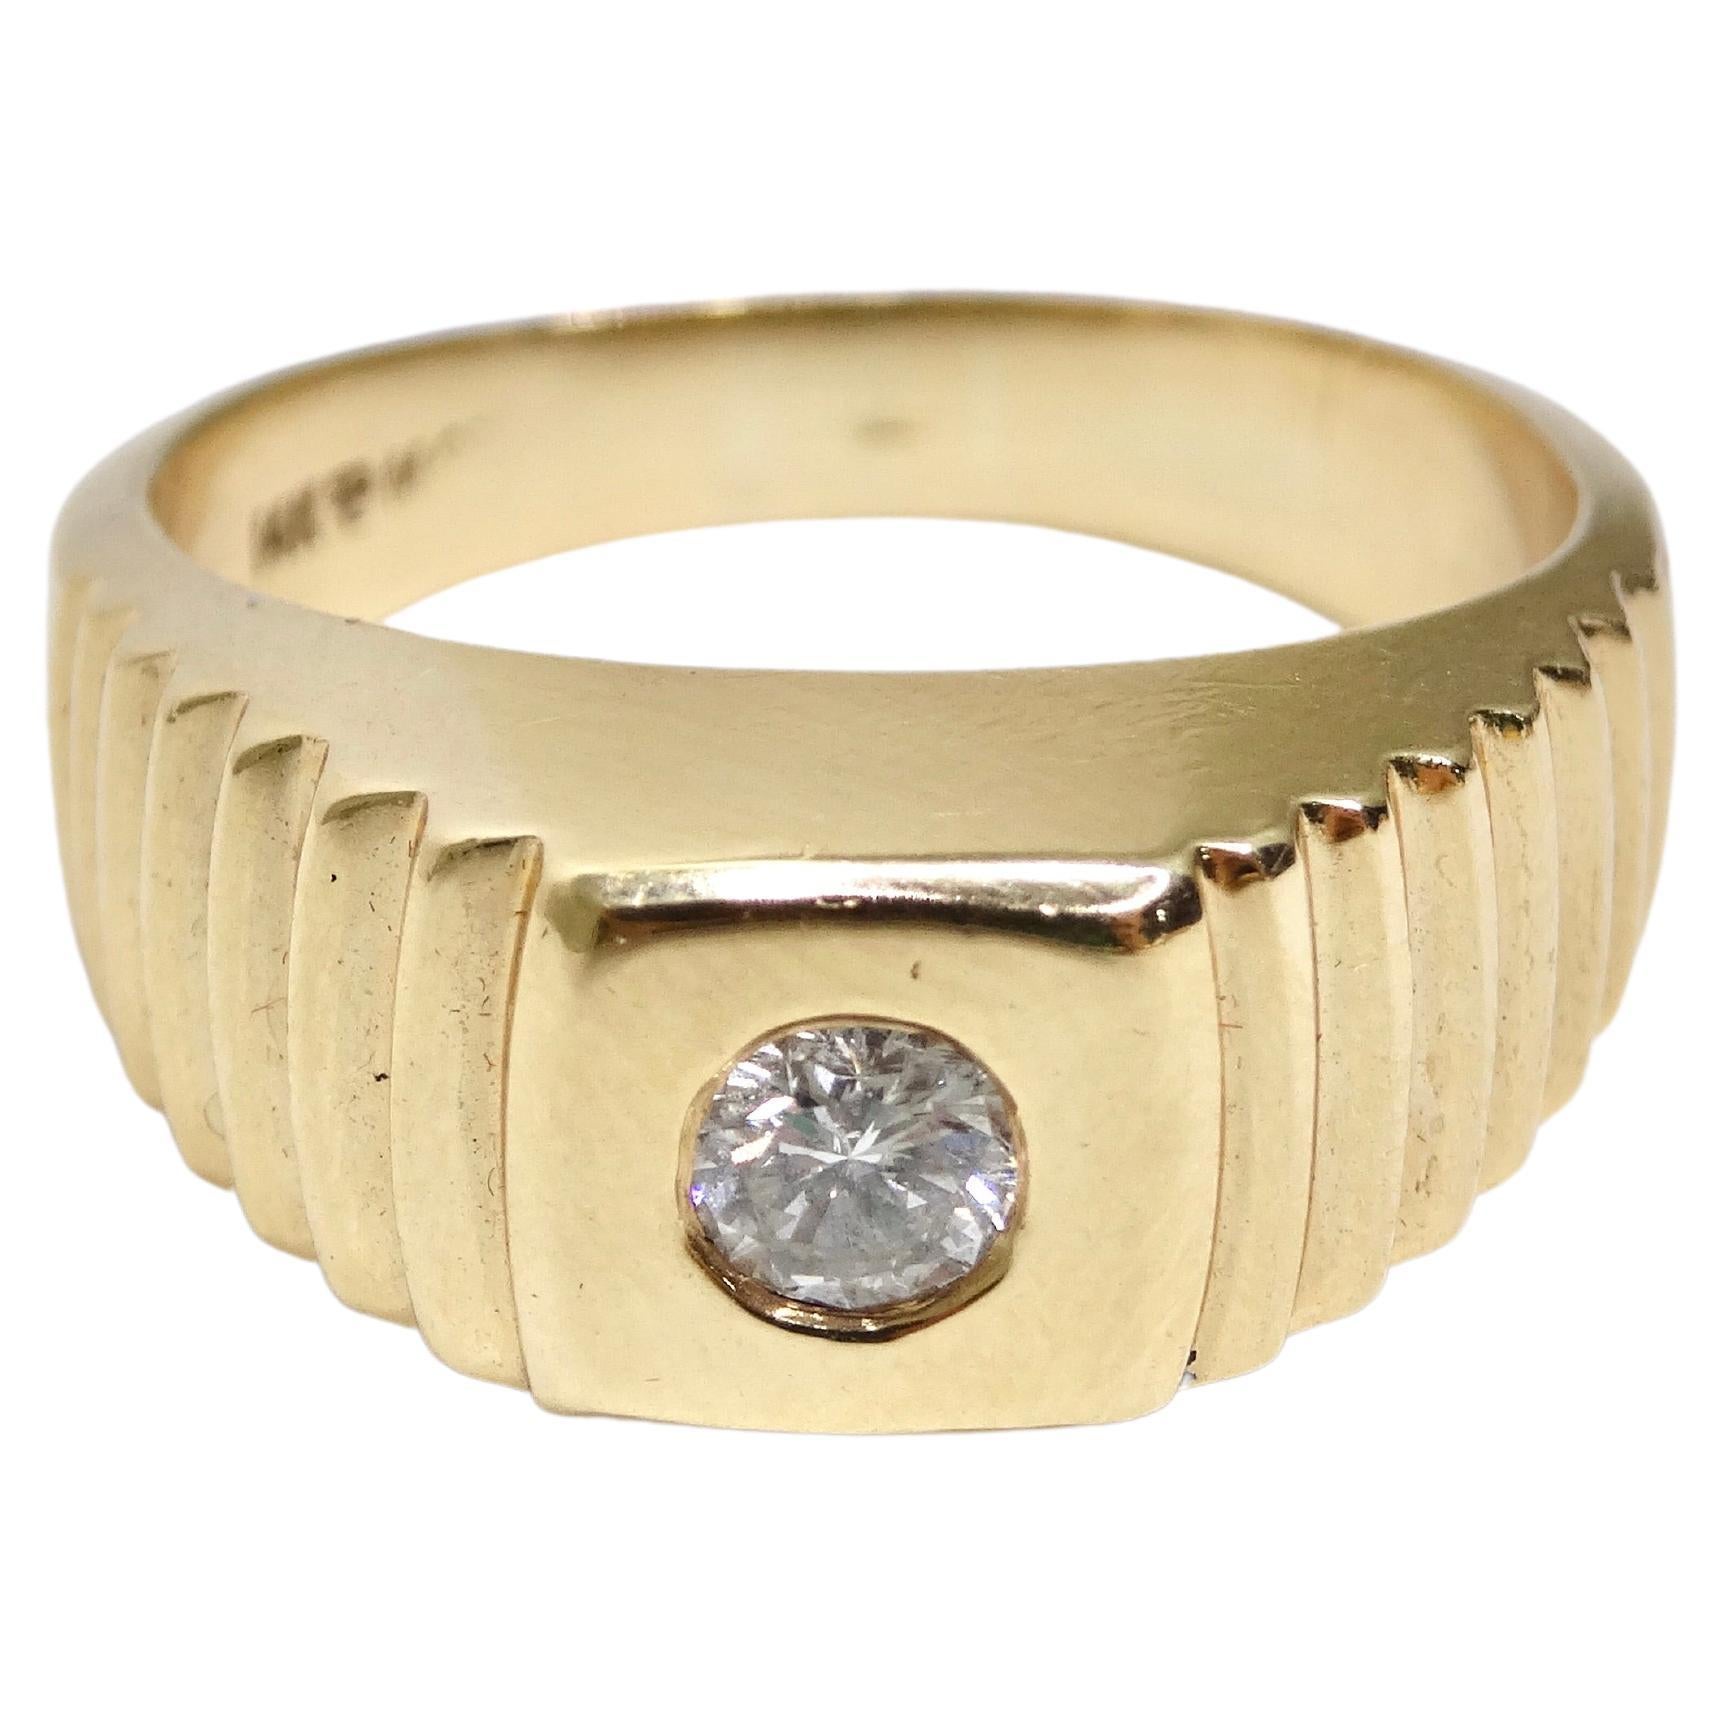 Explore Diamond Gents Ring collection from Senco Gold